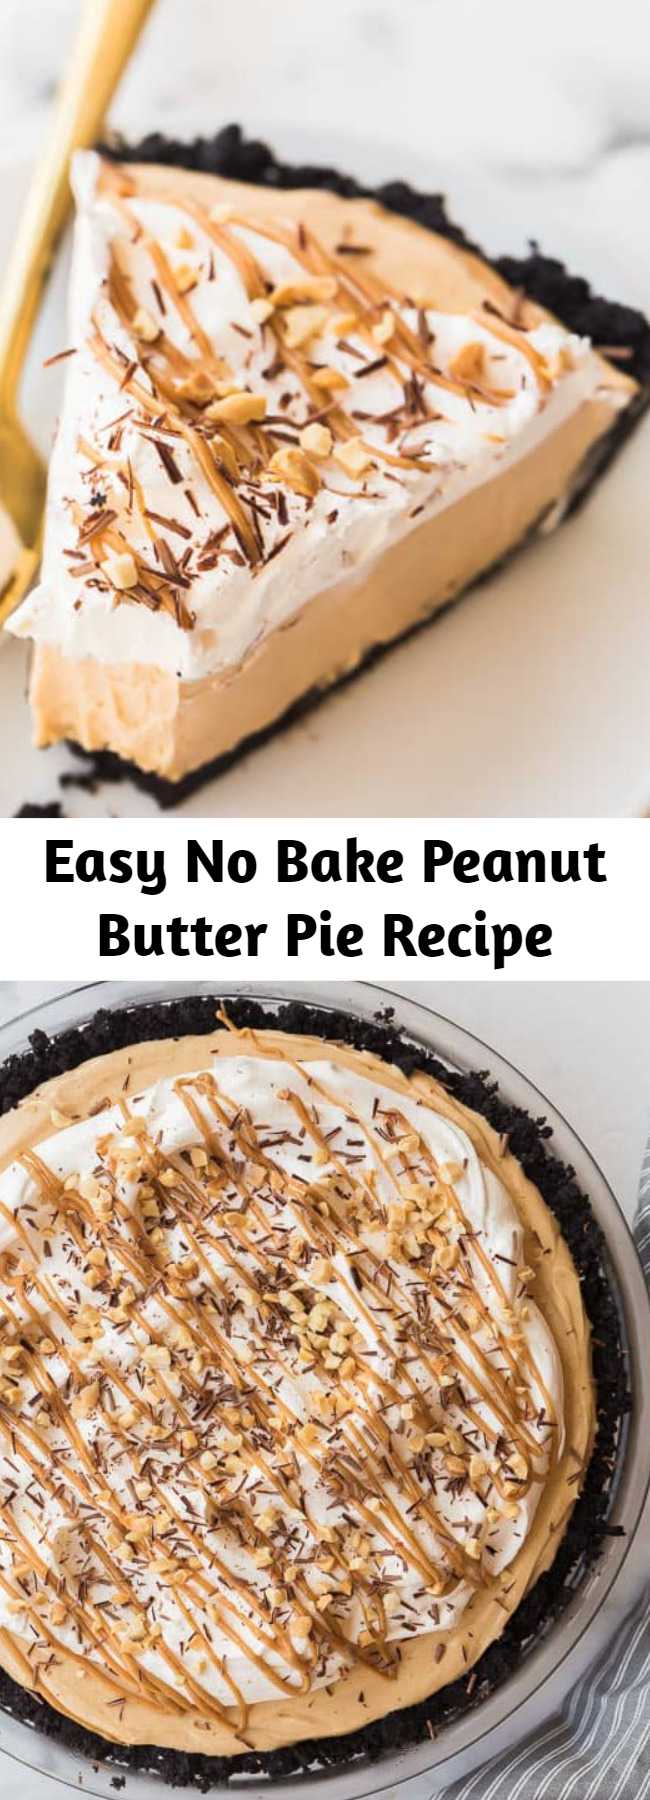 Easy No Bake Peanut Butter Pie Recipe - This Peanut Butter Pie is completely no bake and made with a chocolate Oreo crust, peanut butter cream cheese filling, and topped with more chocolate! #peanutbutter #pie #nobake #dessert #recipes